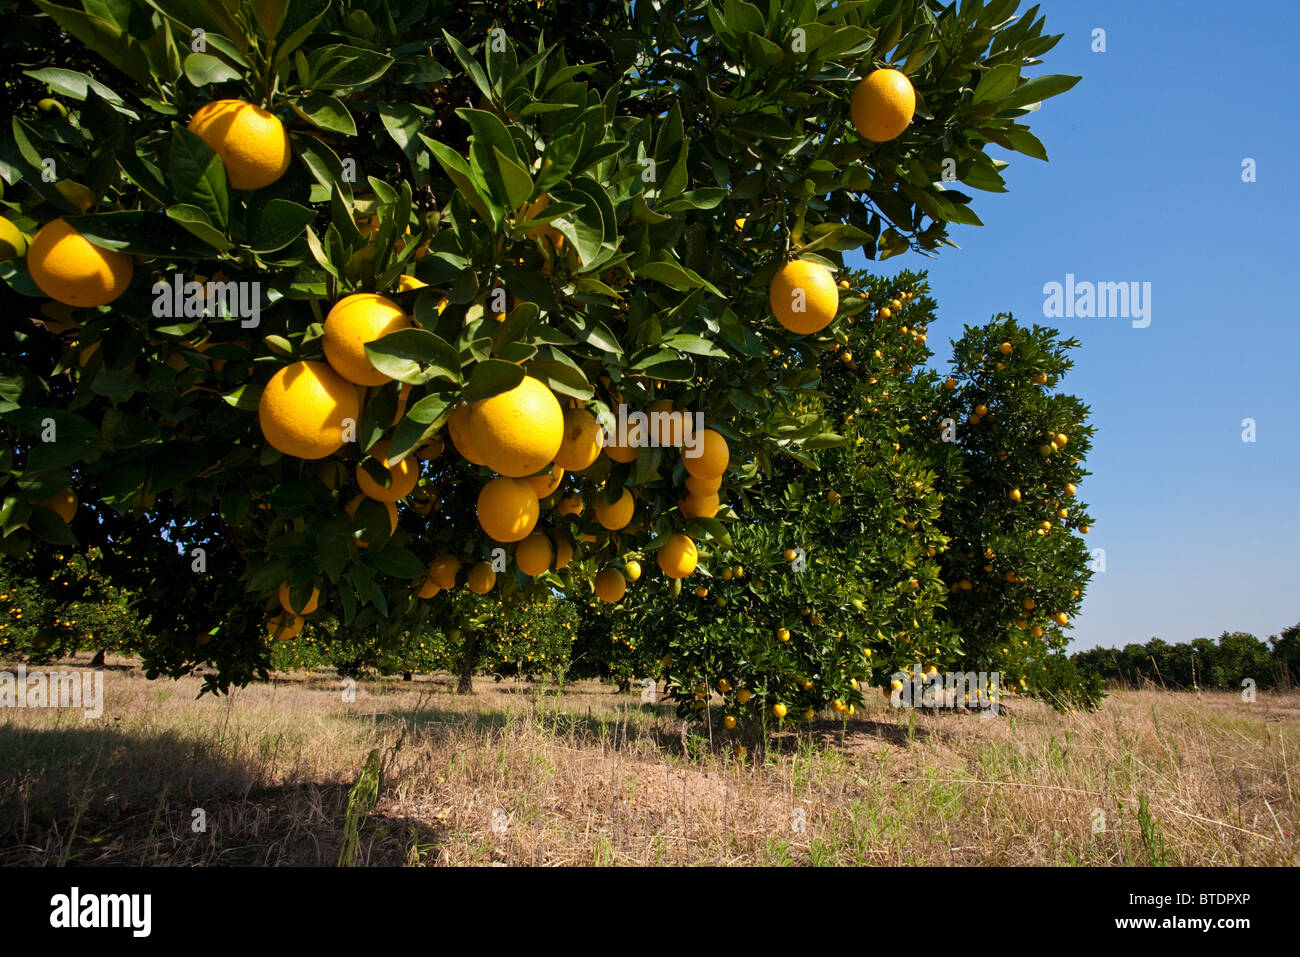 Oranges (Citrus sinensis) hanging from branches Stock Photo